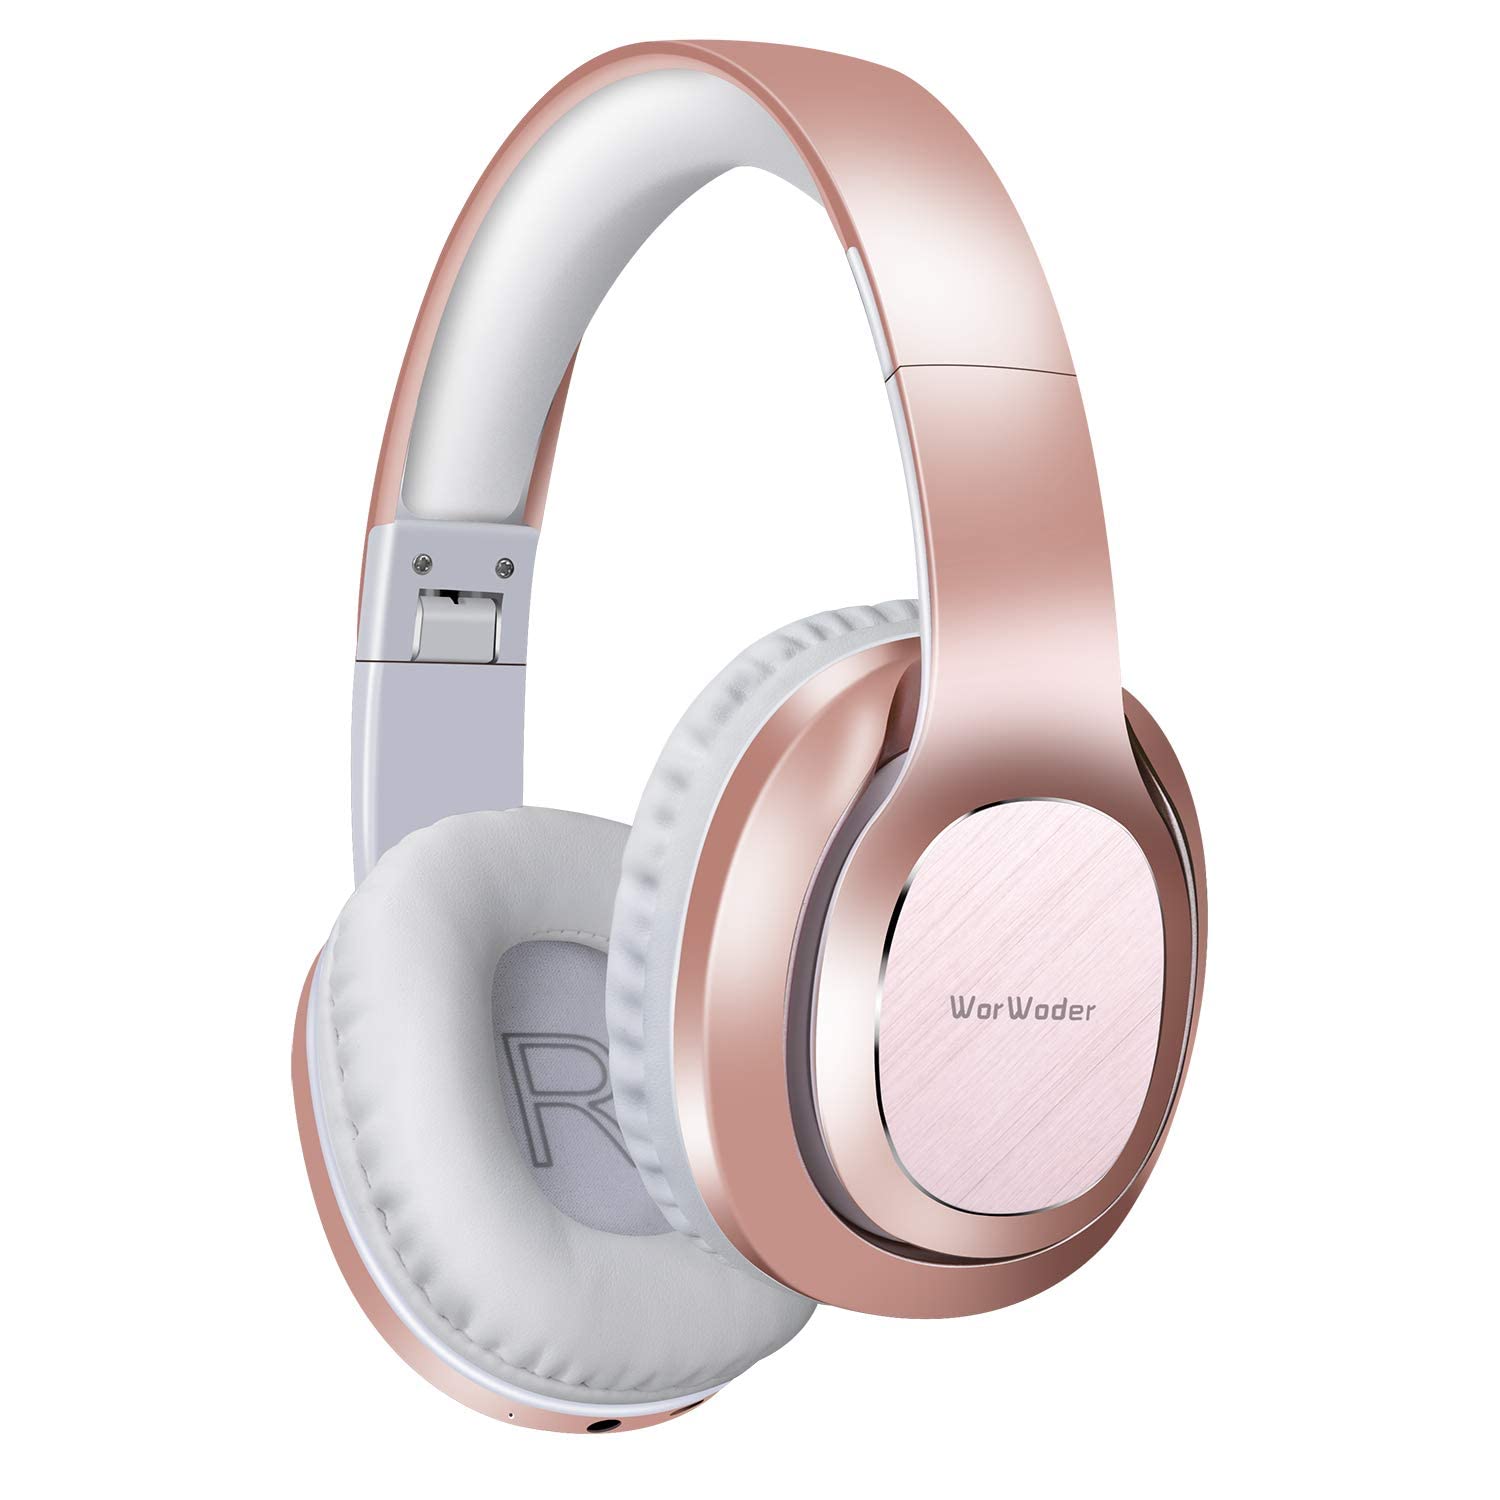 WorWoder Bluetooth Headphones Over Ear, [80 Hrs Playtime] Wireless Headphones, Foldable Hi-Fi Stereo, Soft Memory Protein Earmuffs, Built-in Microphone ＆ Wired Mode for Cellphone PC (Rose Gold)